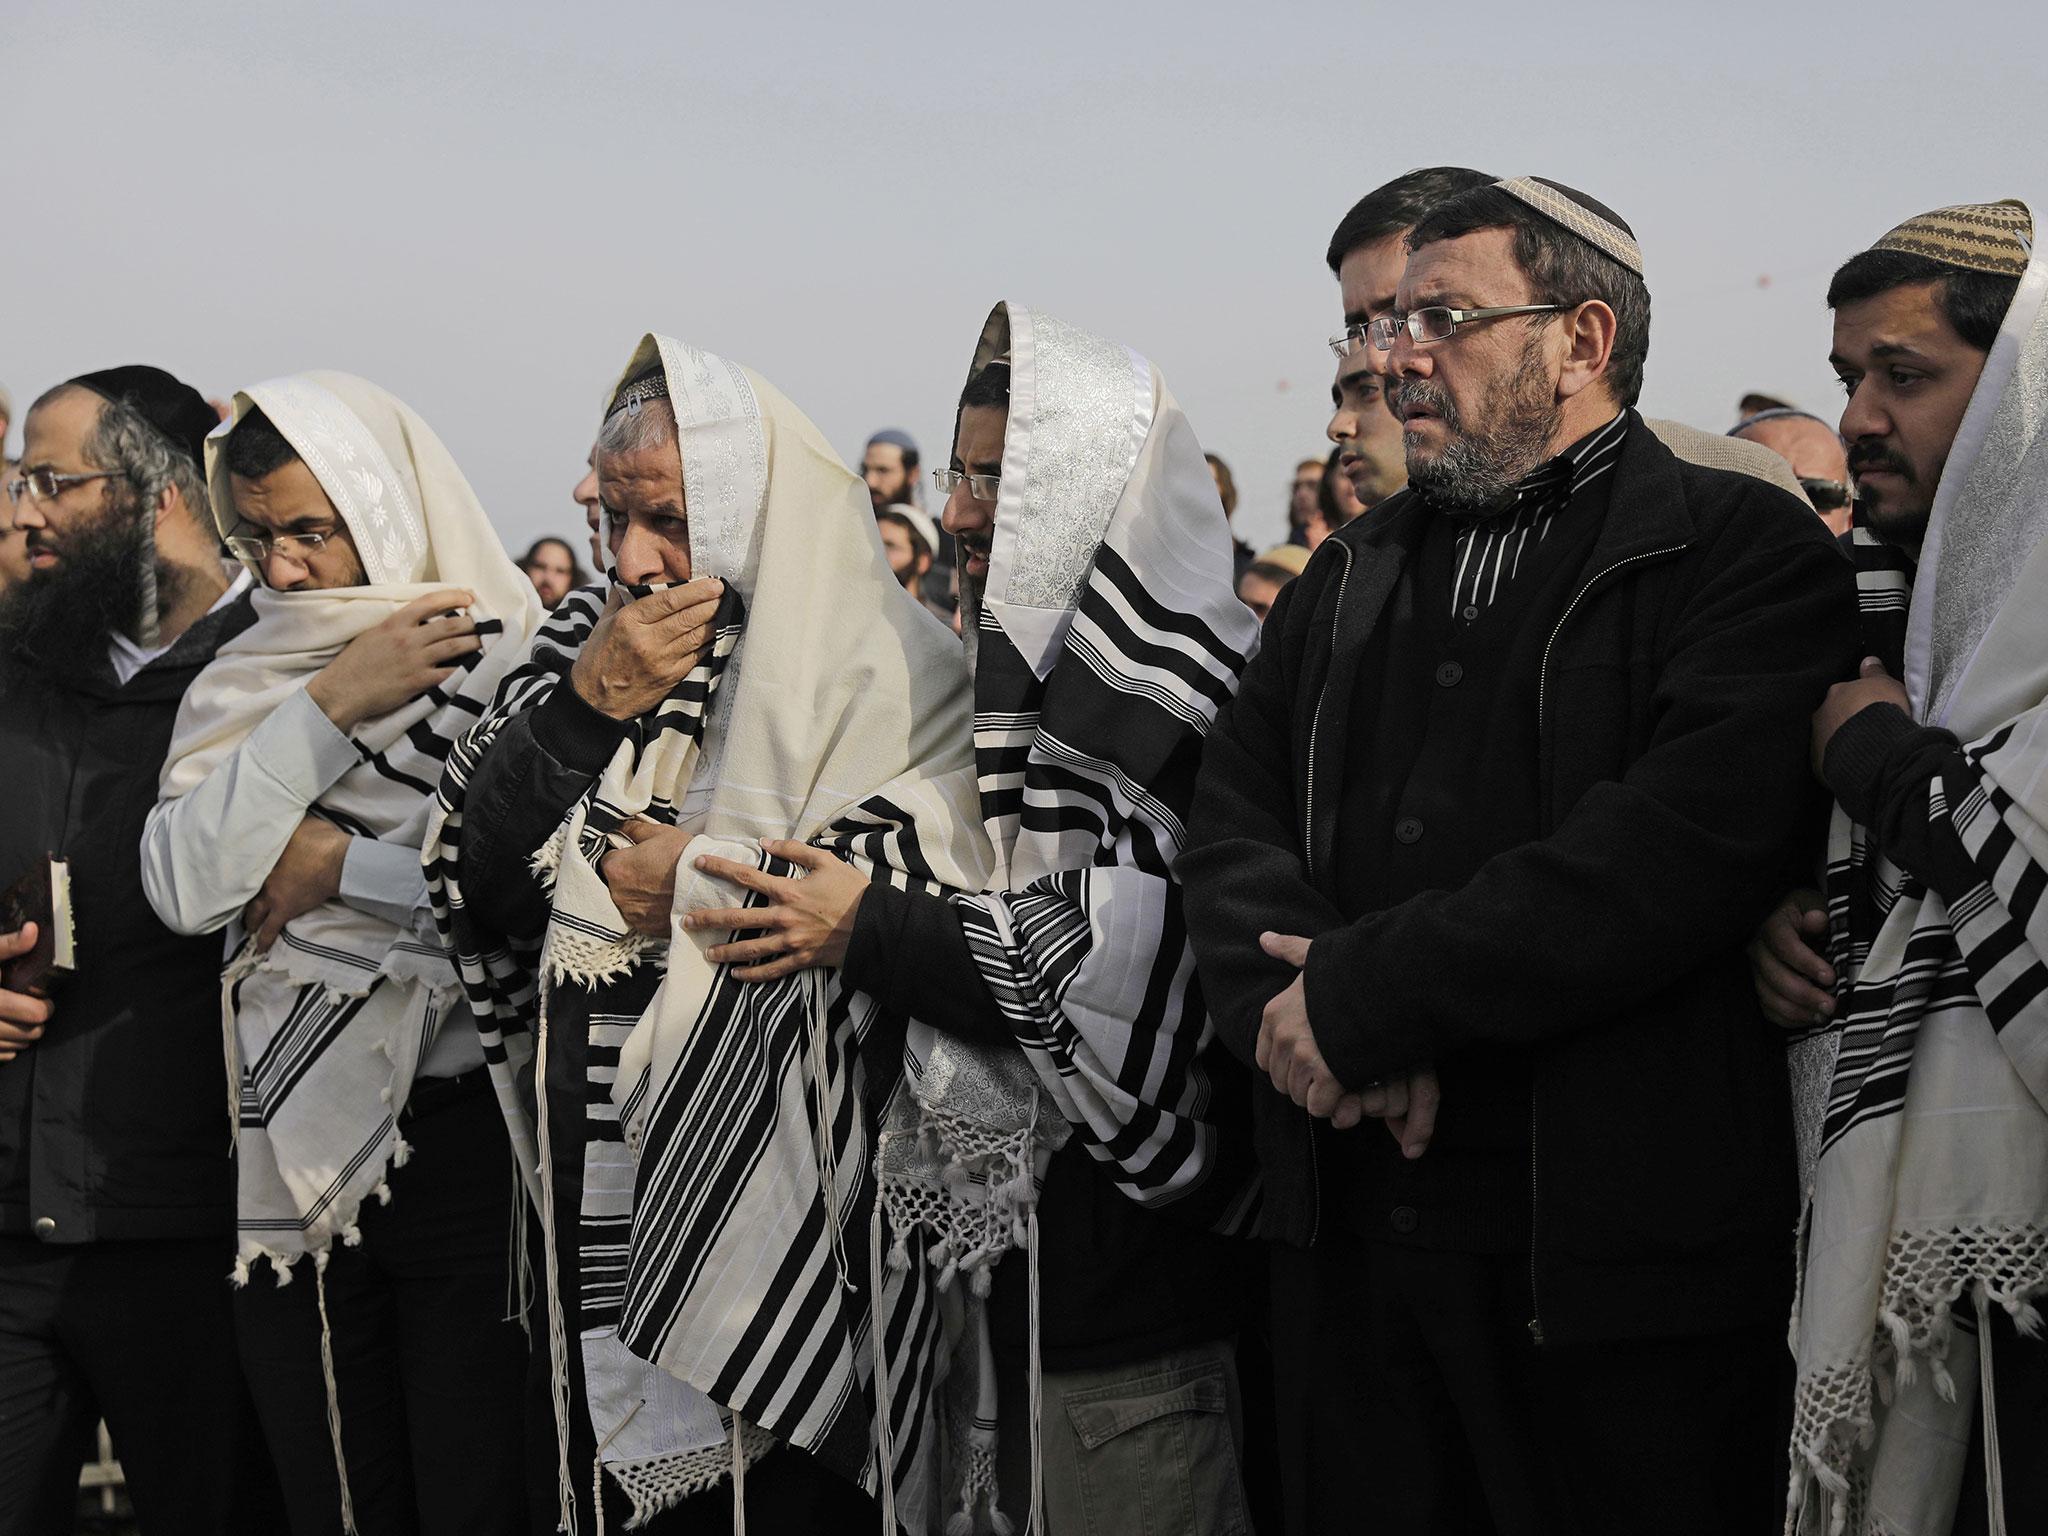 Israelis pray during the funeral of Rabbi Raziel Shevah in Havat Gilad, a currently unauthorised Israeli settlement outpost near the Palestinian city of Nablus